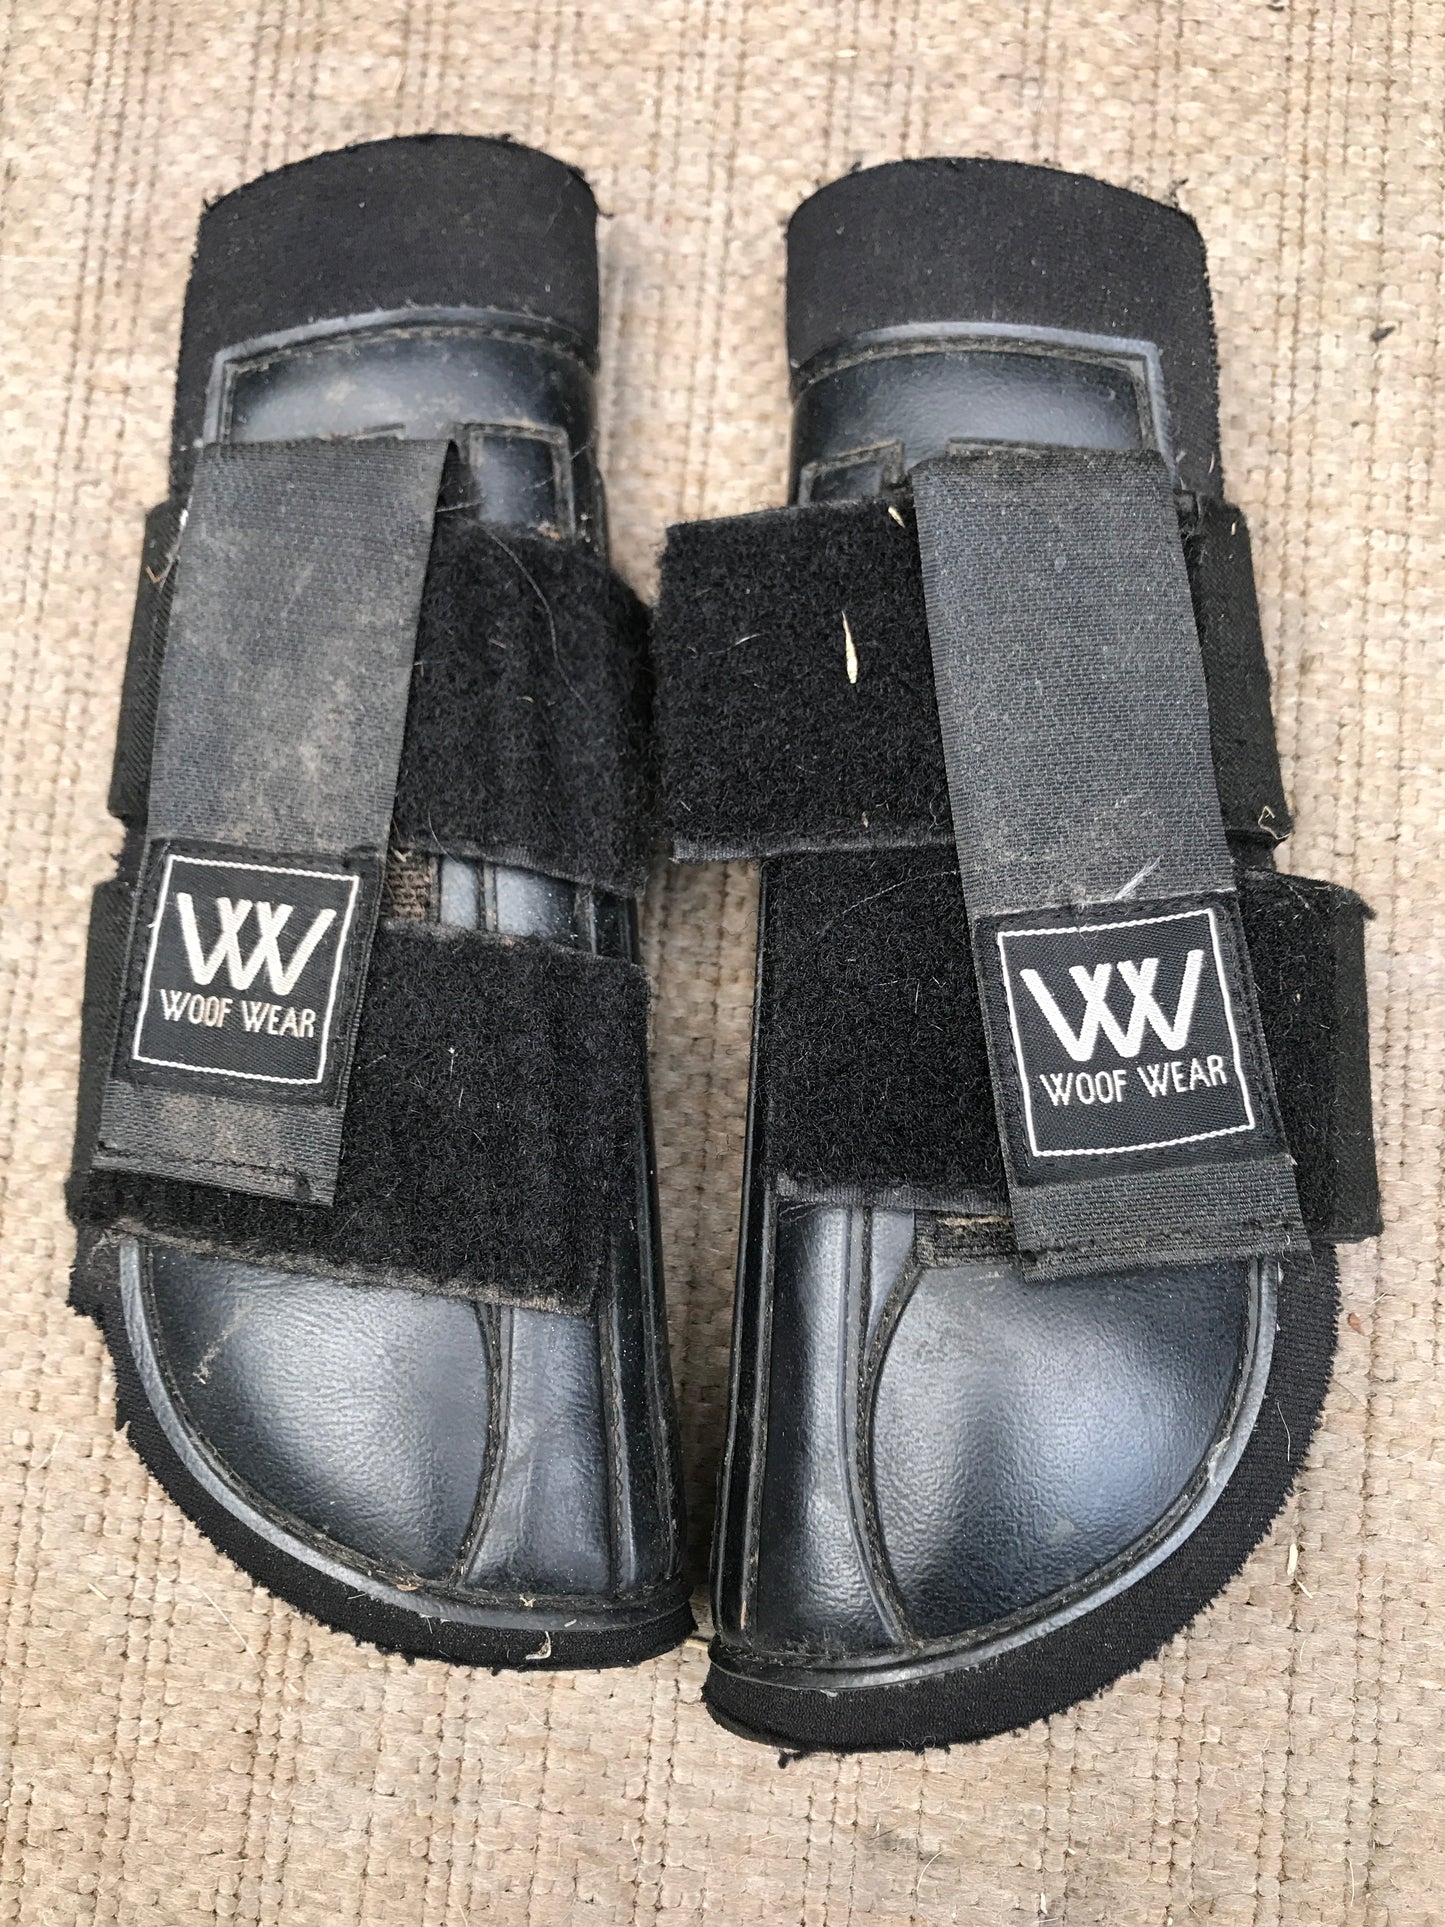 woof wear s/m tendon boots FREE POSTAGE